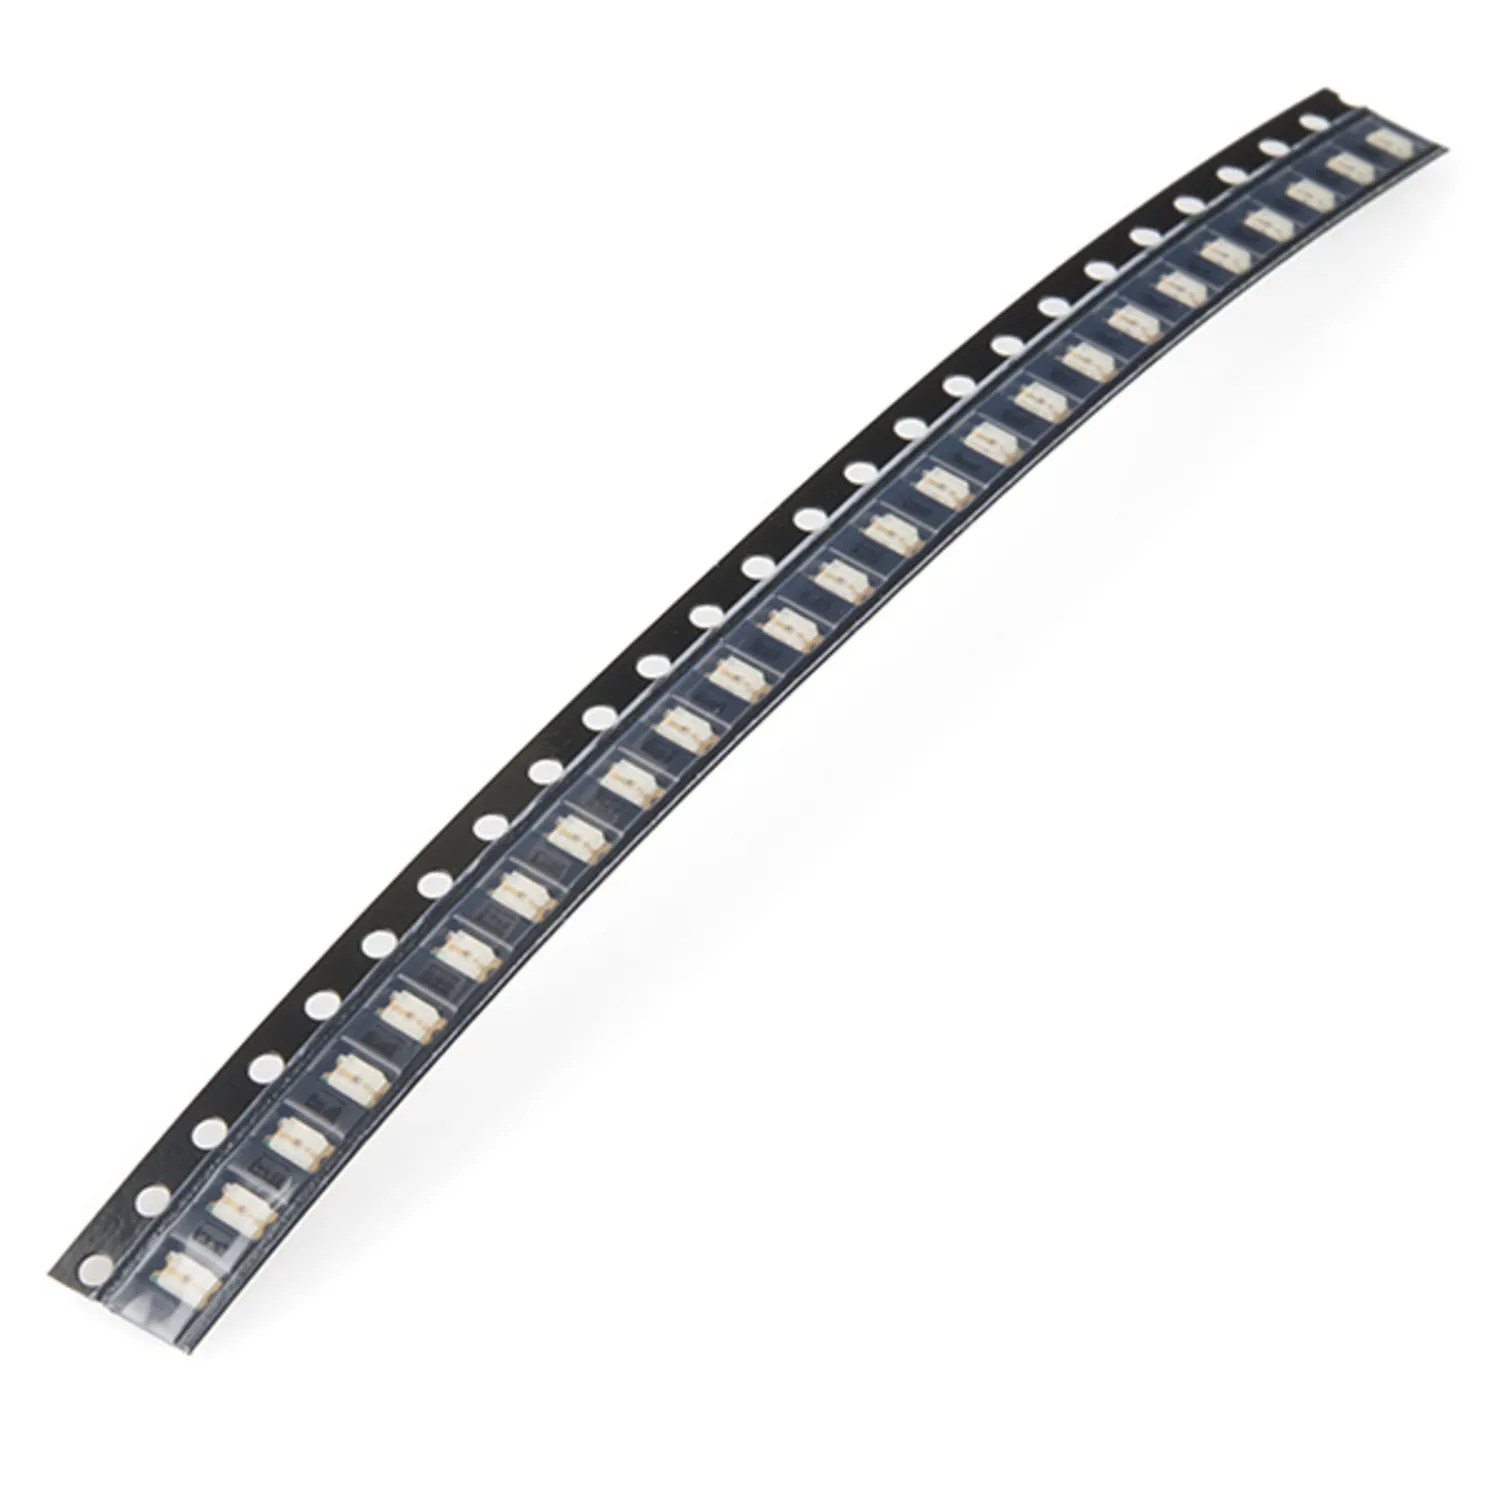 Photo of SMD LED - White 1206 (strip of 25)